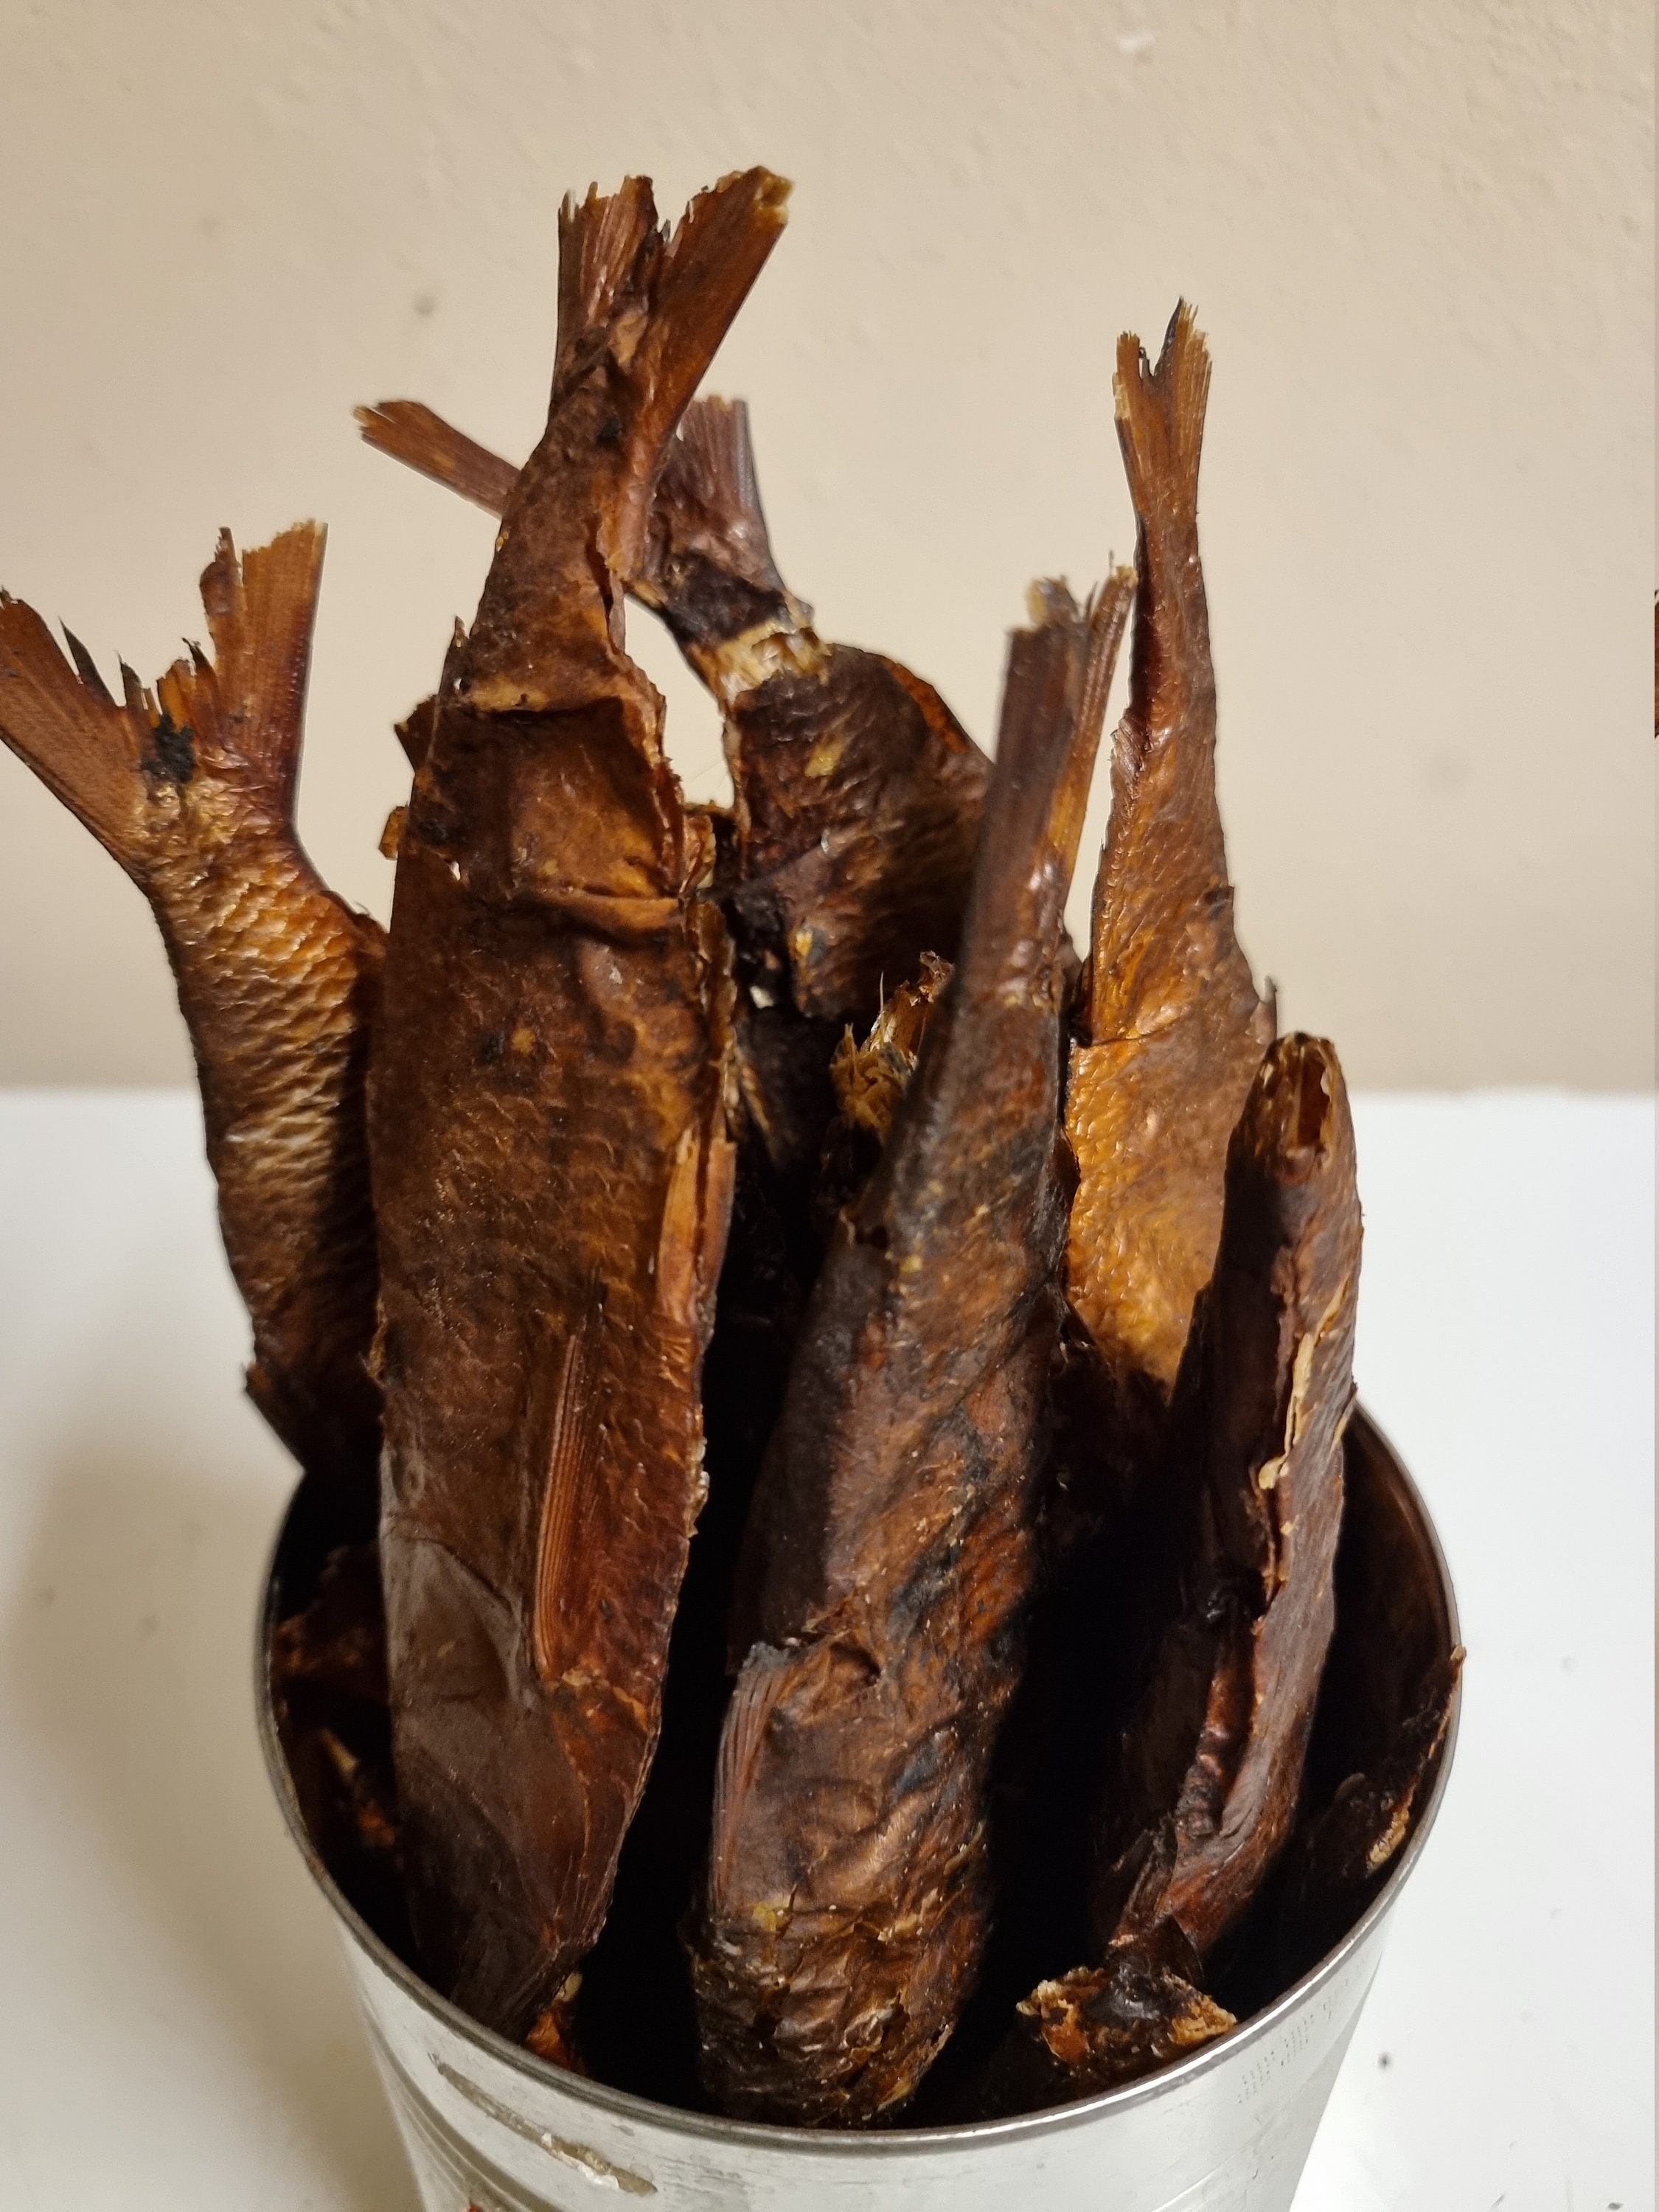 Many dried fish called stockfish for sale at european market Stock